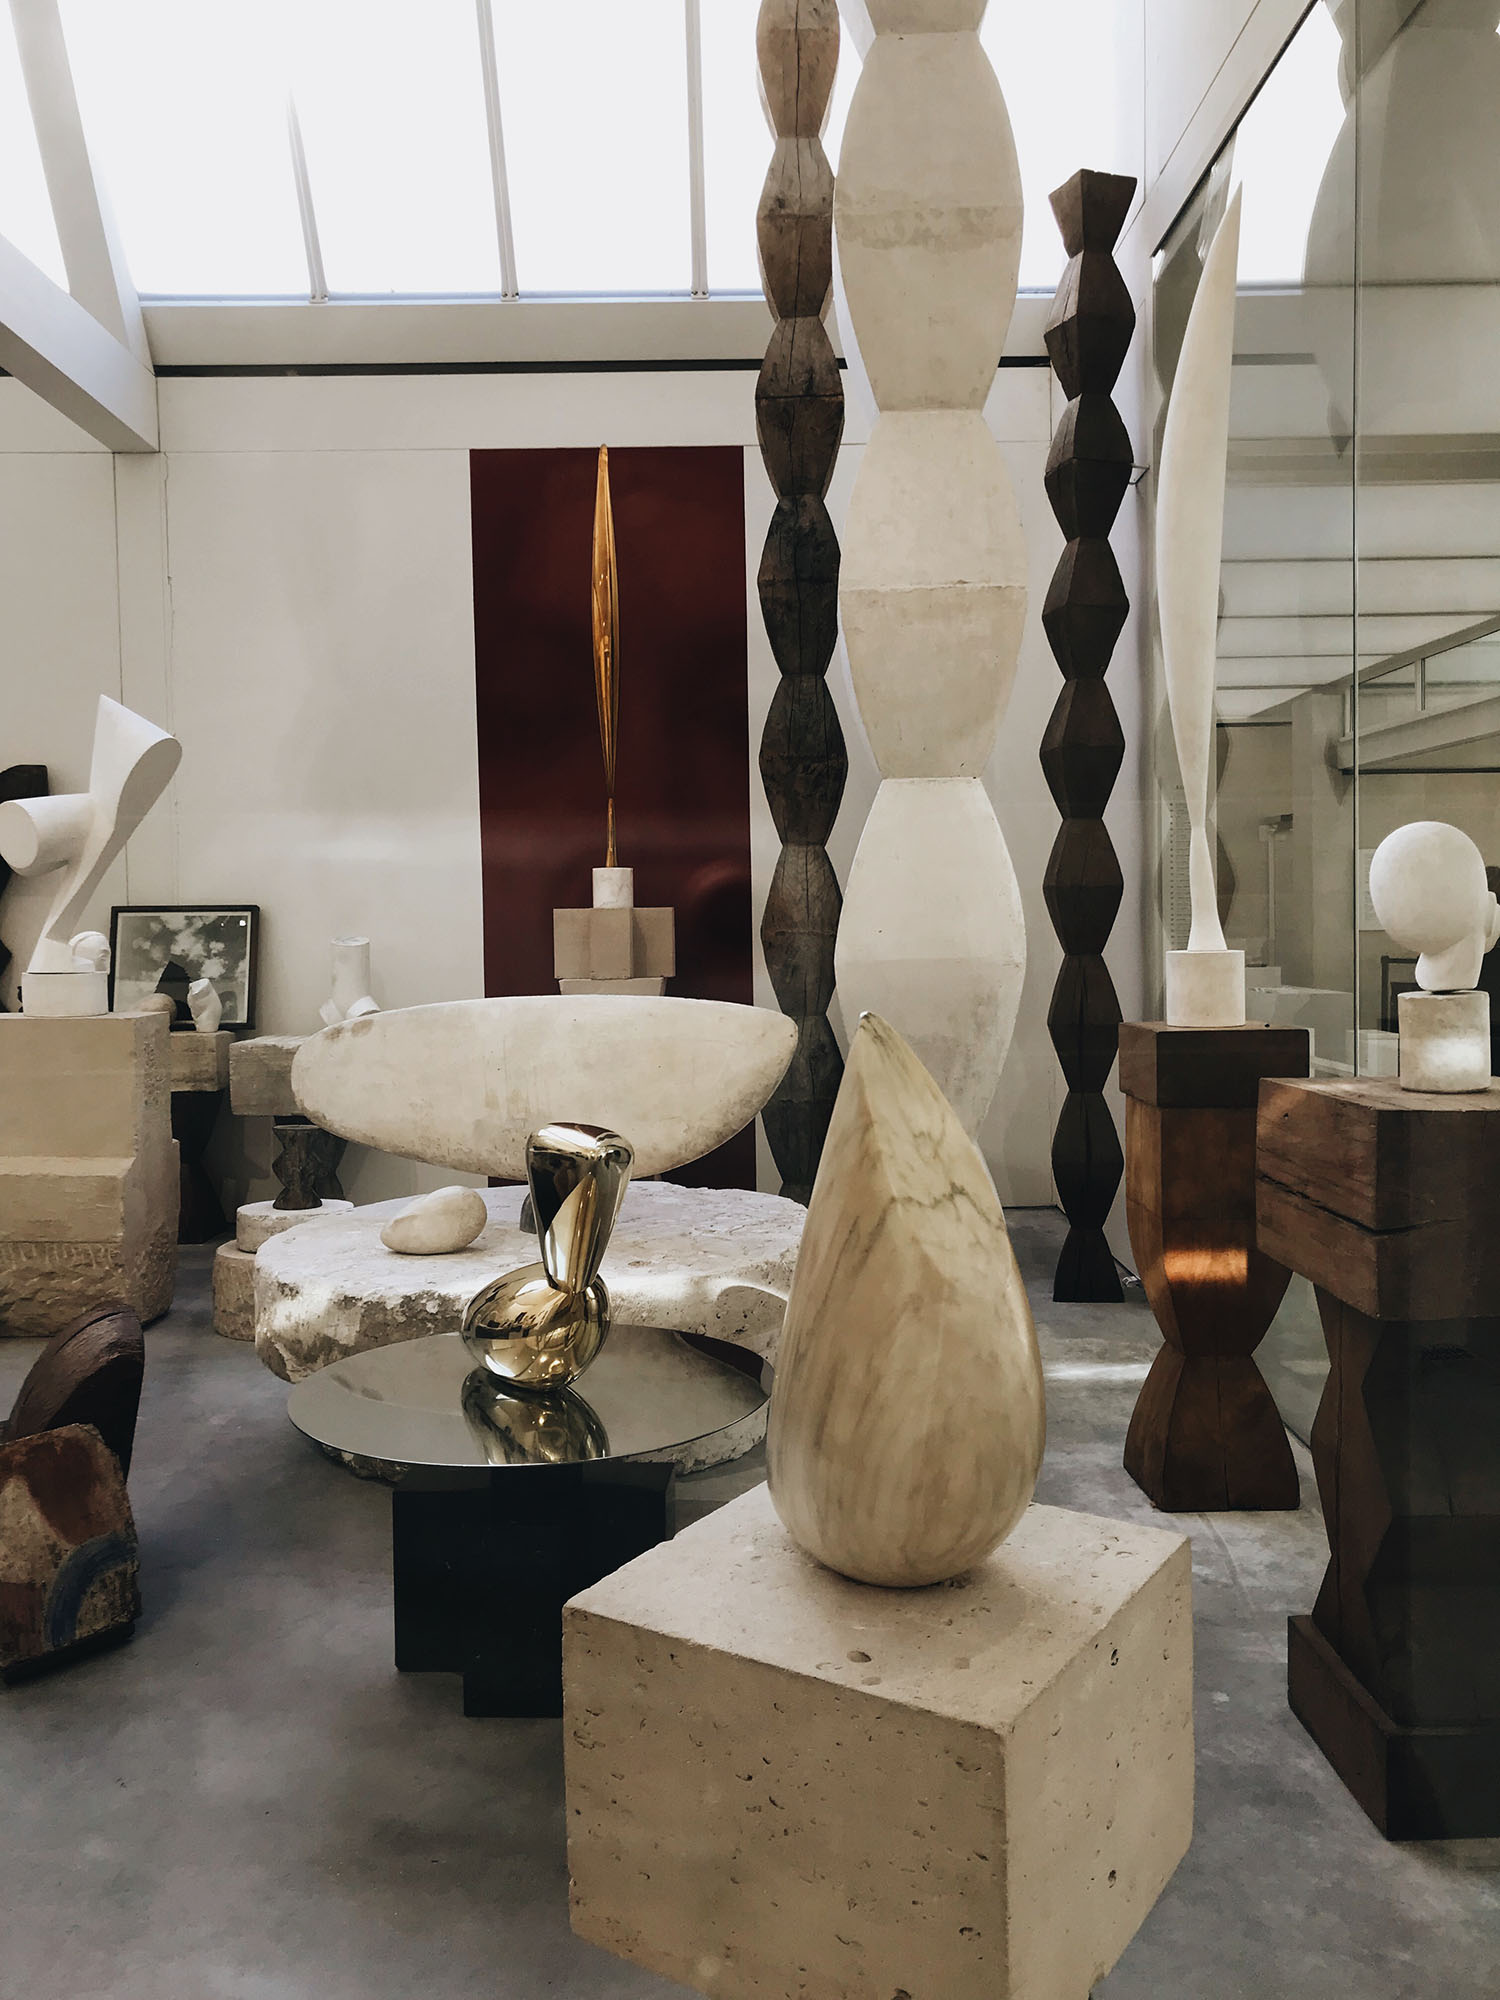 Atelier Brancusi in Paris, as photographed by top Canadian travel blogger Cee Fardoe of Coco & Vera